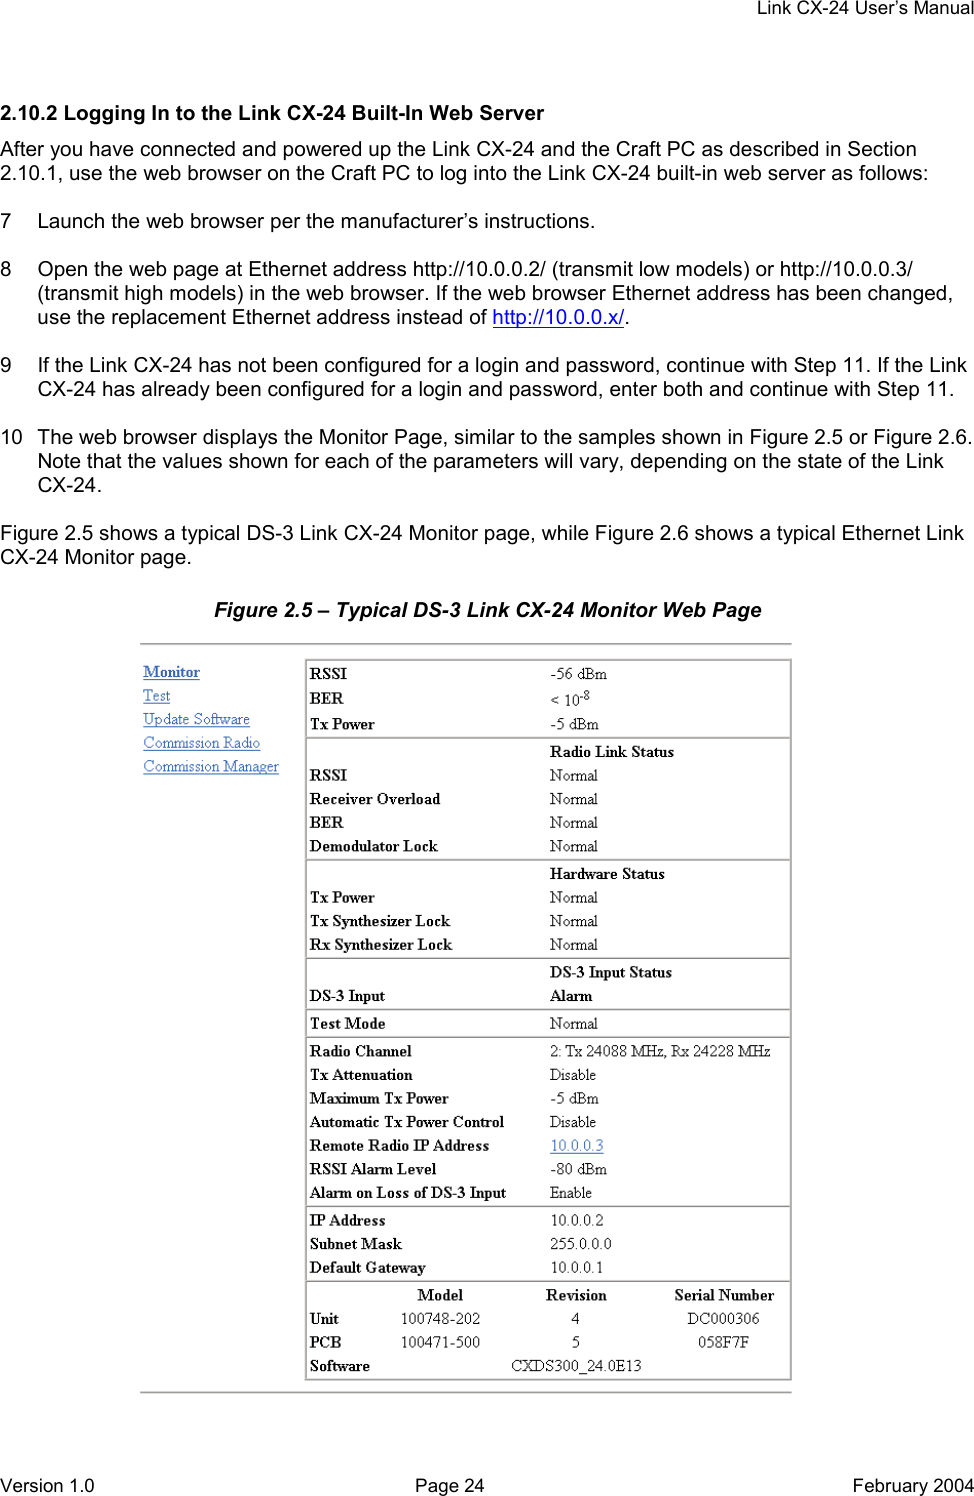     Link CX-24 User’s Manual Version 1.0  Page 24  February 2004 2.10.2 Logging In to the Link CX-24 Built-In Web Server After you have connected and powered up the Link CX-24 and the Craft PC as described in Section 2.10.1, use the web browser on the Craft PC to log into the Link CX-24 built-in web server as follows:  7  Launch the web browser per the manufacturer’s instructions.  8  Open the web page at Ethernet address http://10.0.0.2/ (transmit low models) or http://10.0.0.3/ (transmit high models) in the web browser. If the web browser Ethernet address has been changed, use the replacement Ethernet address instead of http://10.0.0.x/.  9  If the Link CX-24 has not been configured for a login and password, continue with Step 11. If the Link CX-24 has already been configured for a login and password, enter both and continue with Step 11.  10  The web browser displays the Monitor Page, similar to the samples shown in Figure 2.5 or Figure 2.6. Note that the values shown for each of the parameters will vary, depending on the state of the Link CX-24.  Figure 2.5 shows a typical DS-3 Link CX-24 Monitor page, while Figure 2.6 shows a typical Ethernet Link CX-24 Monitor page. Figure 2.5 – Typical DS-3 Link CX-24 Monitor Web Page  